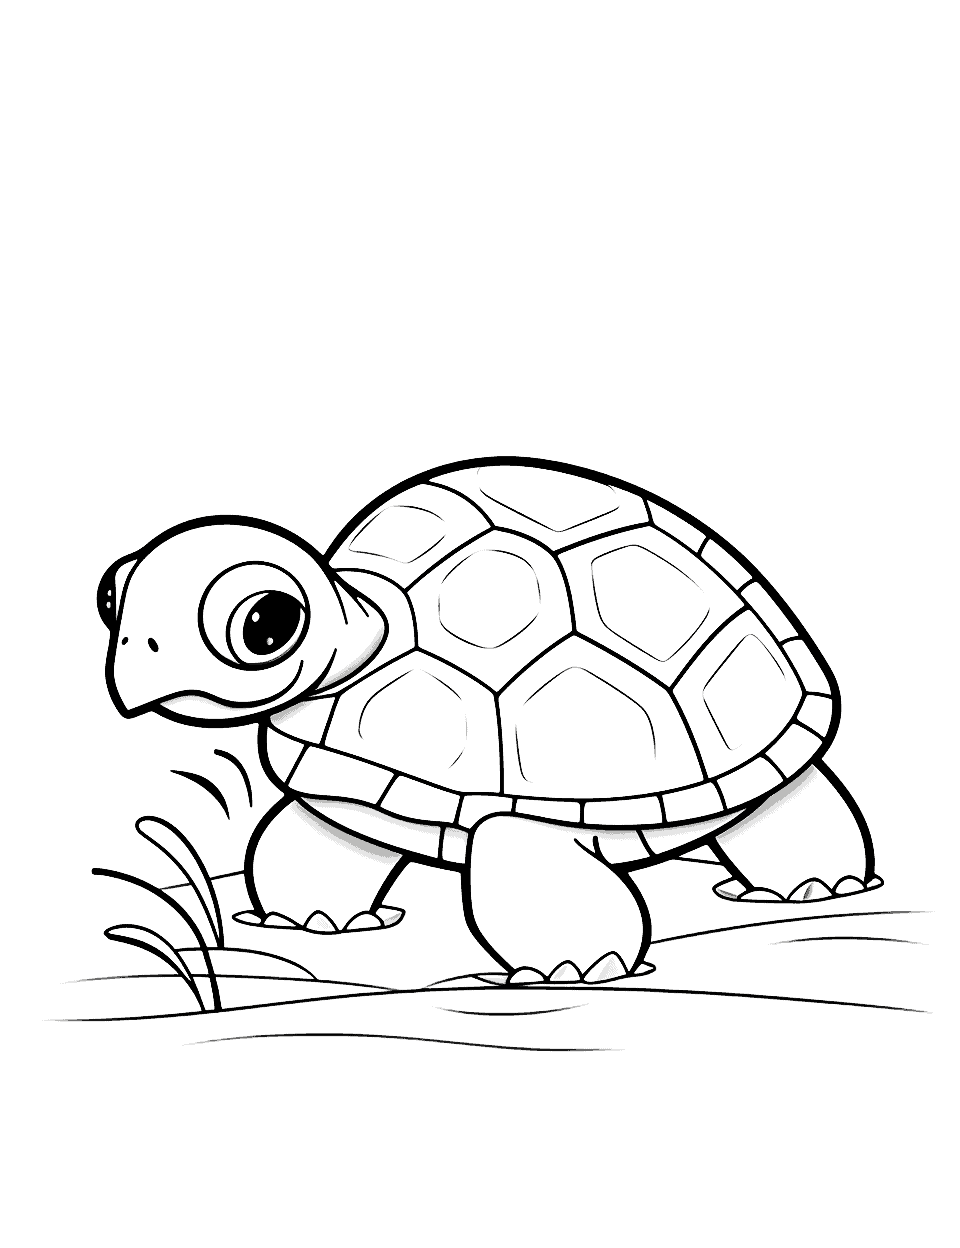 Cute Turtle in a Pond Coloring Page - A turtle gracefully standing in calm waters.